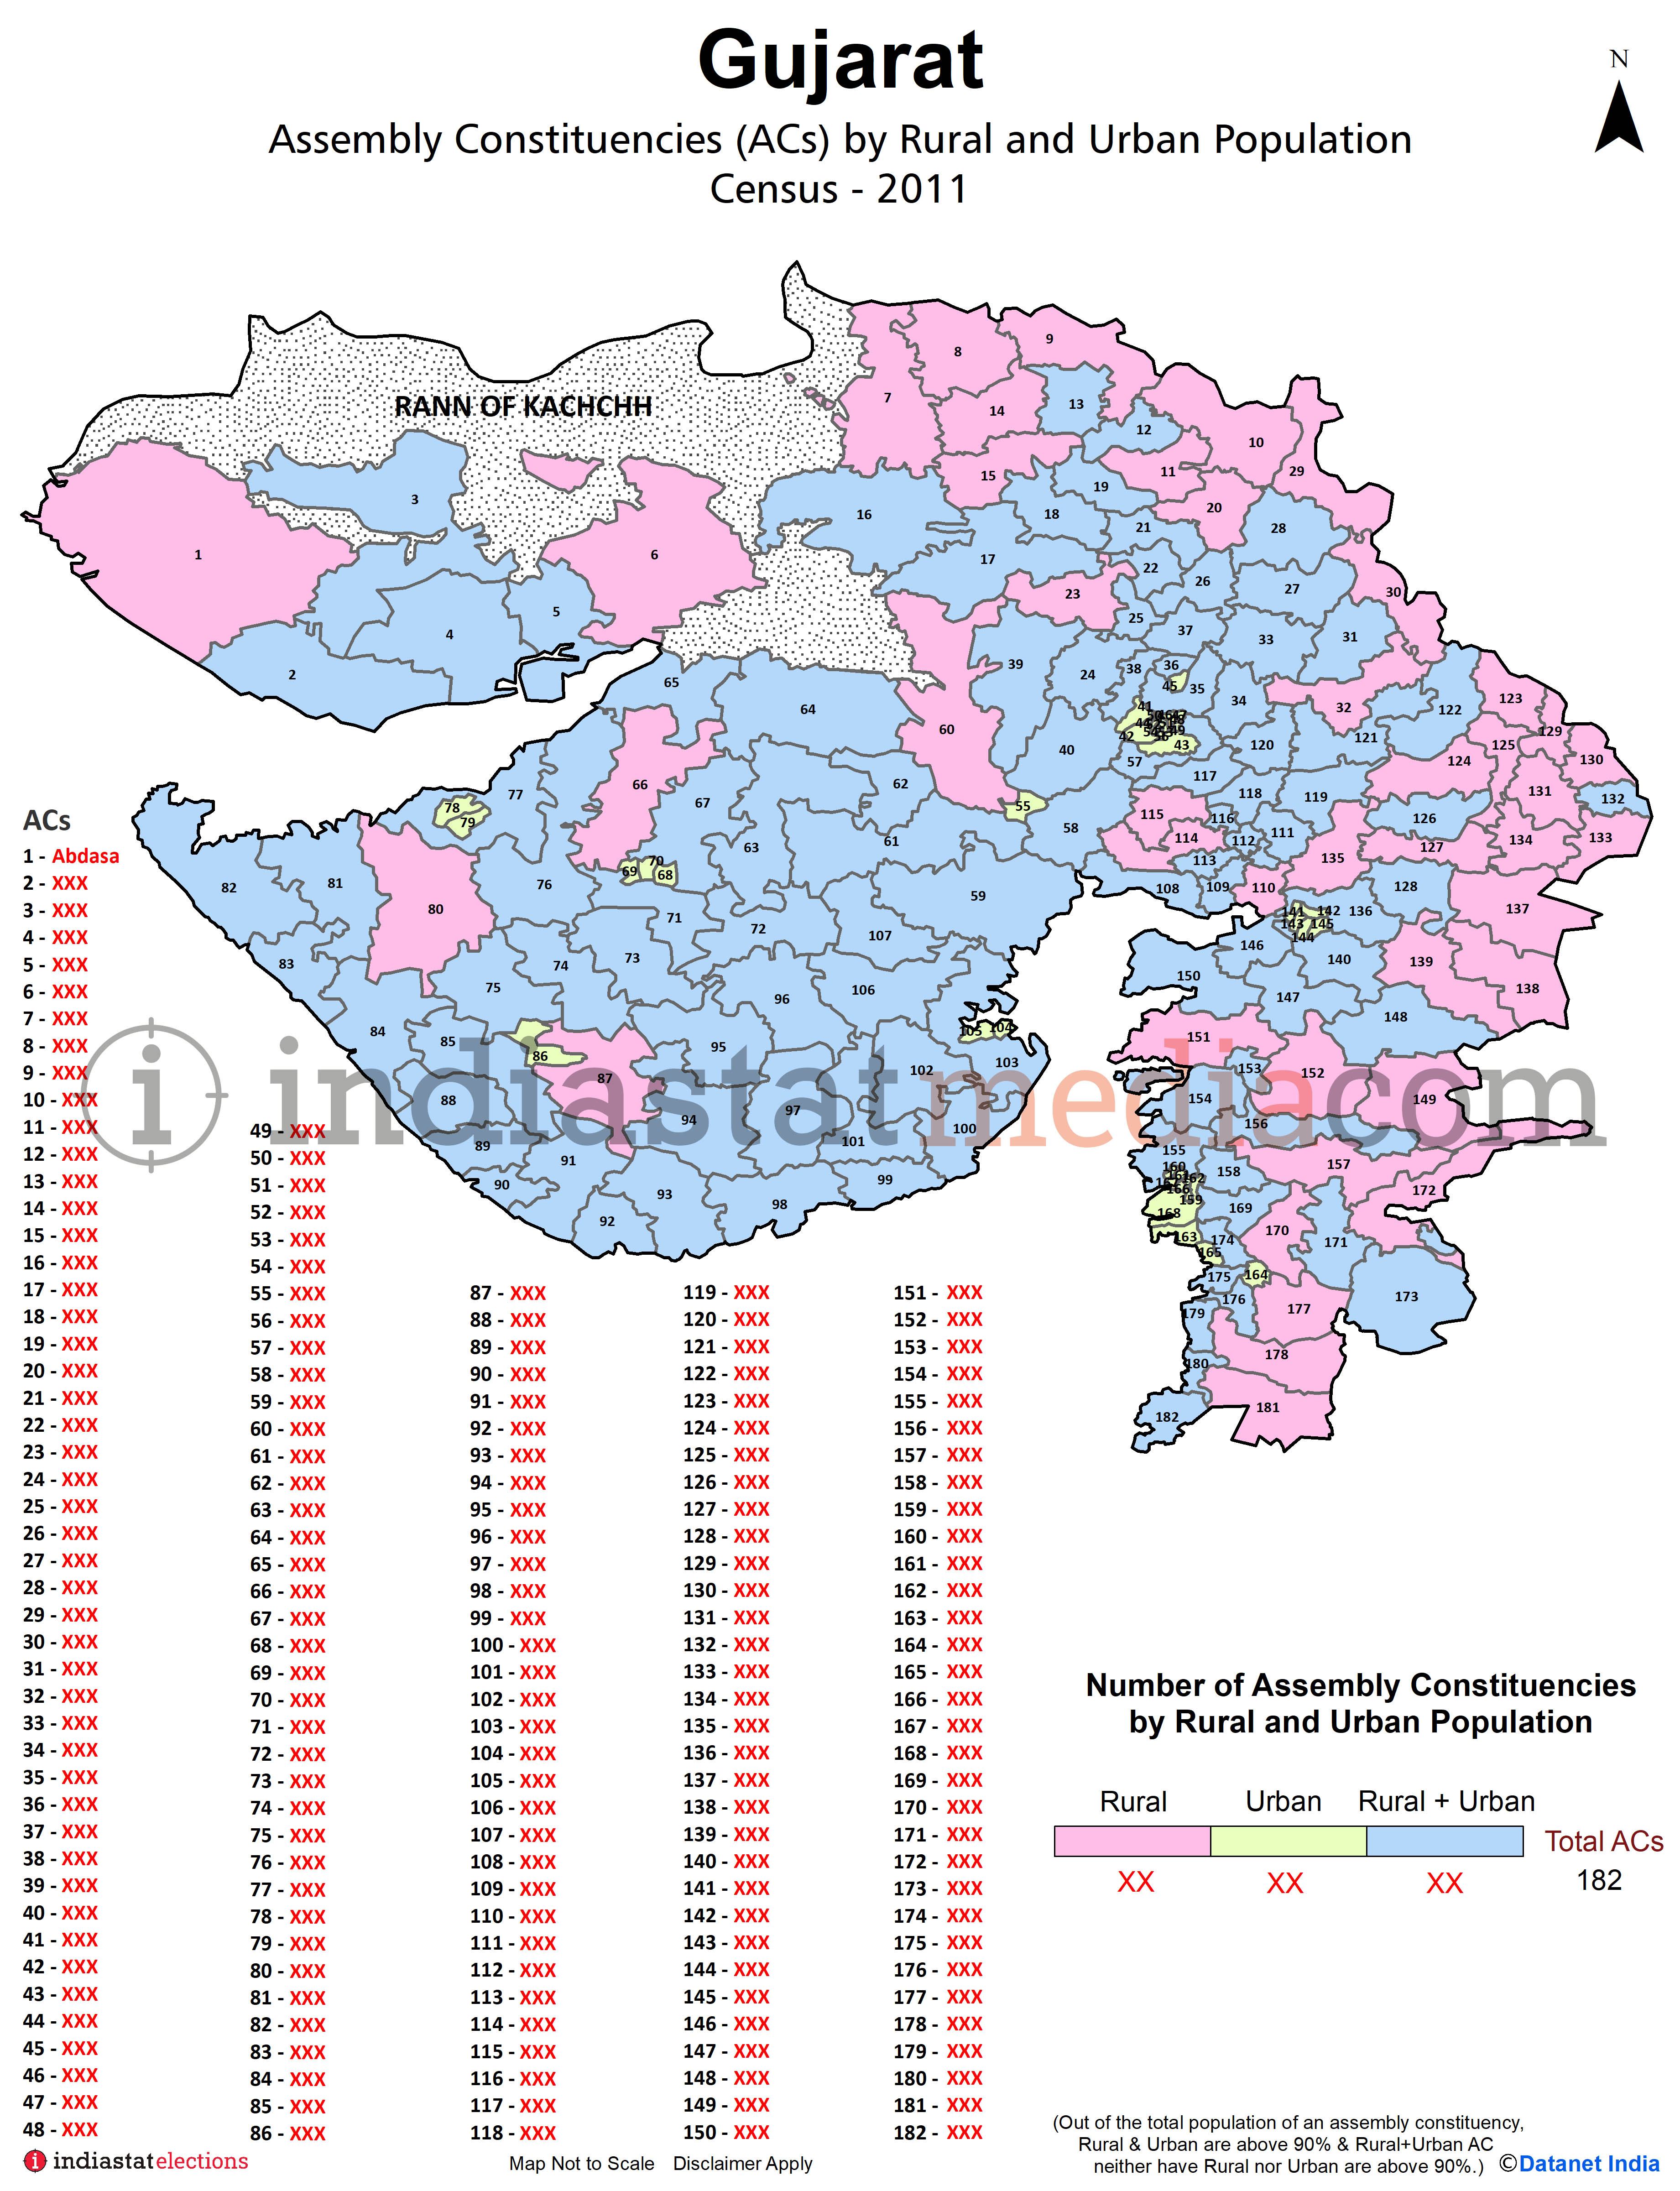 Assembly Constituencies (ACs) by Rural and Urban Population in Gujarat - Census 2011